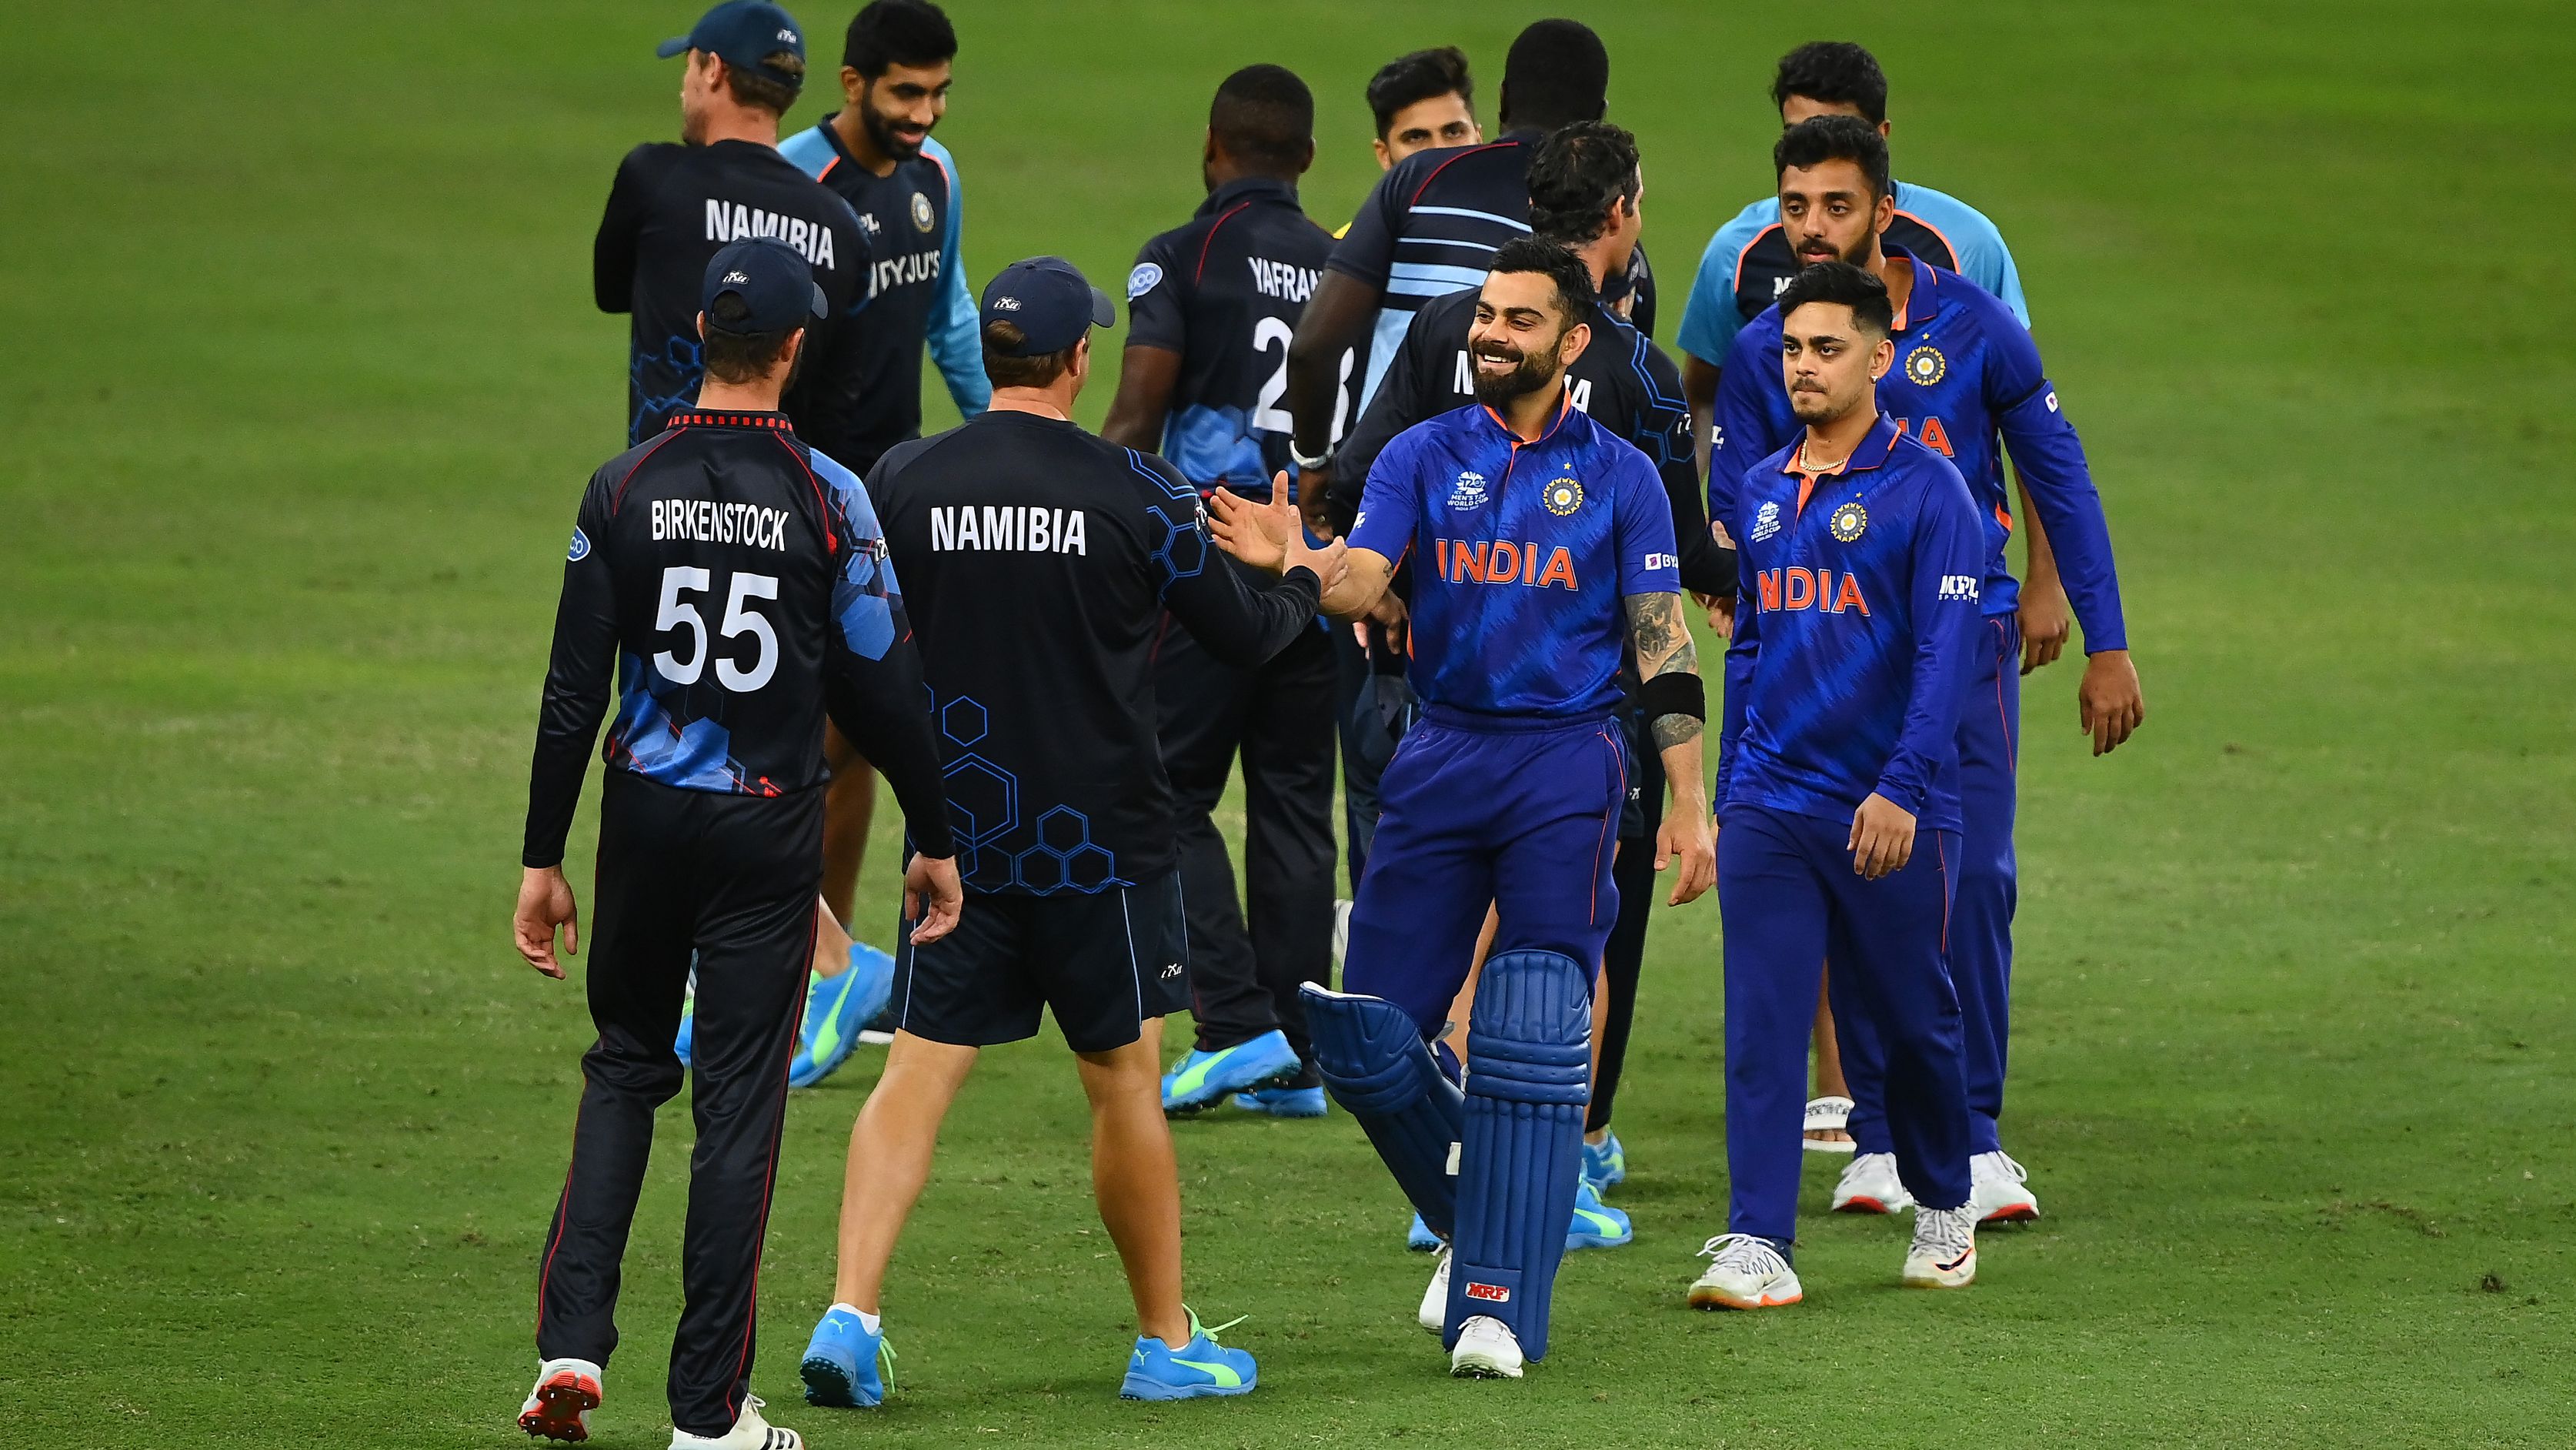 India bids farewell to coach in World Cup exit